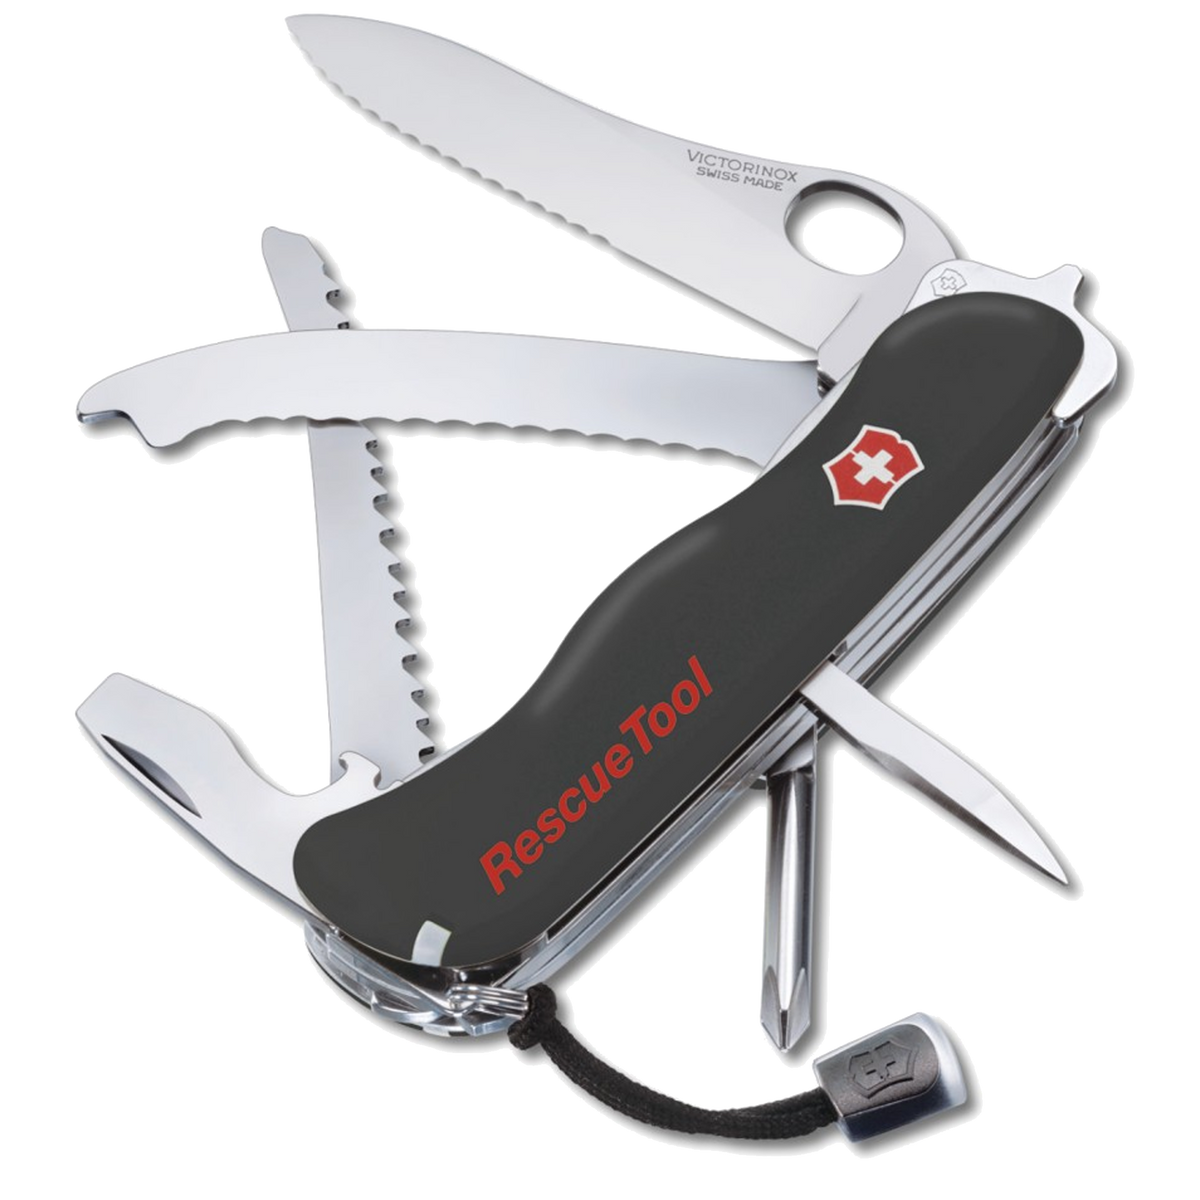 Victorinox - Large Swiss Army Knife - Rescue Tool